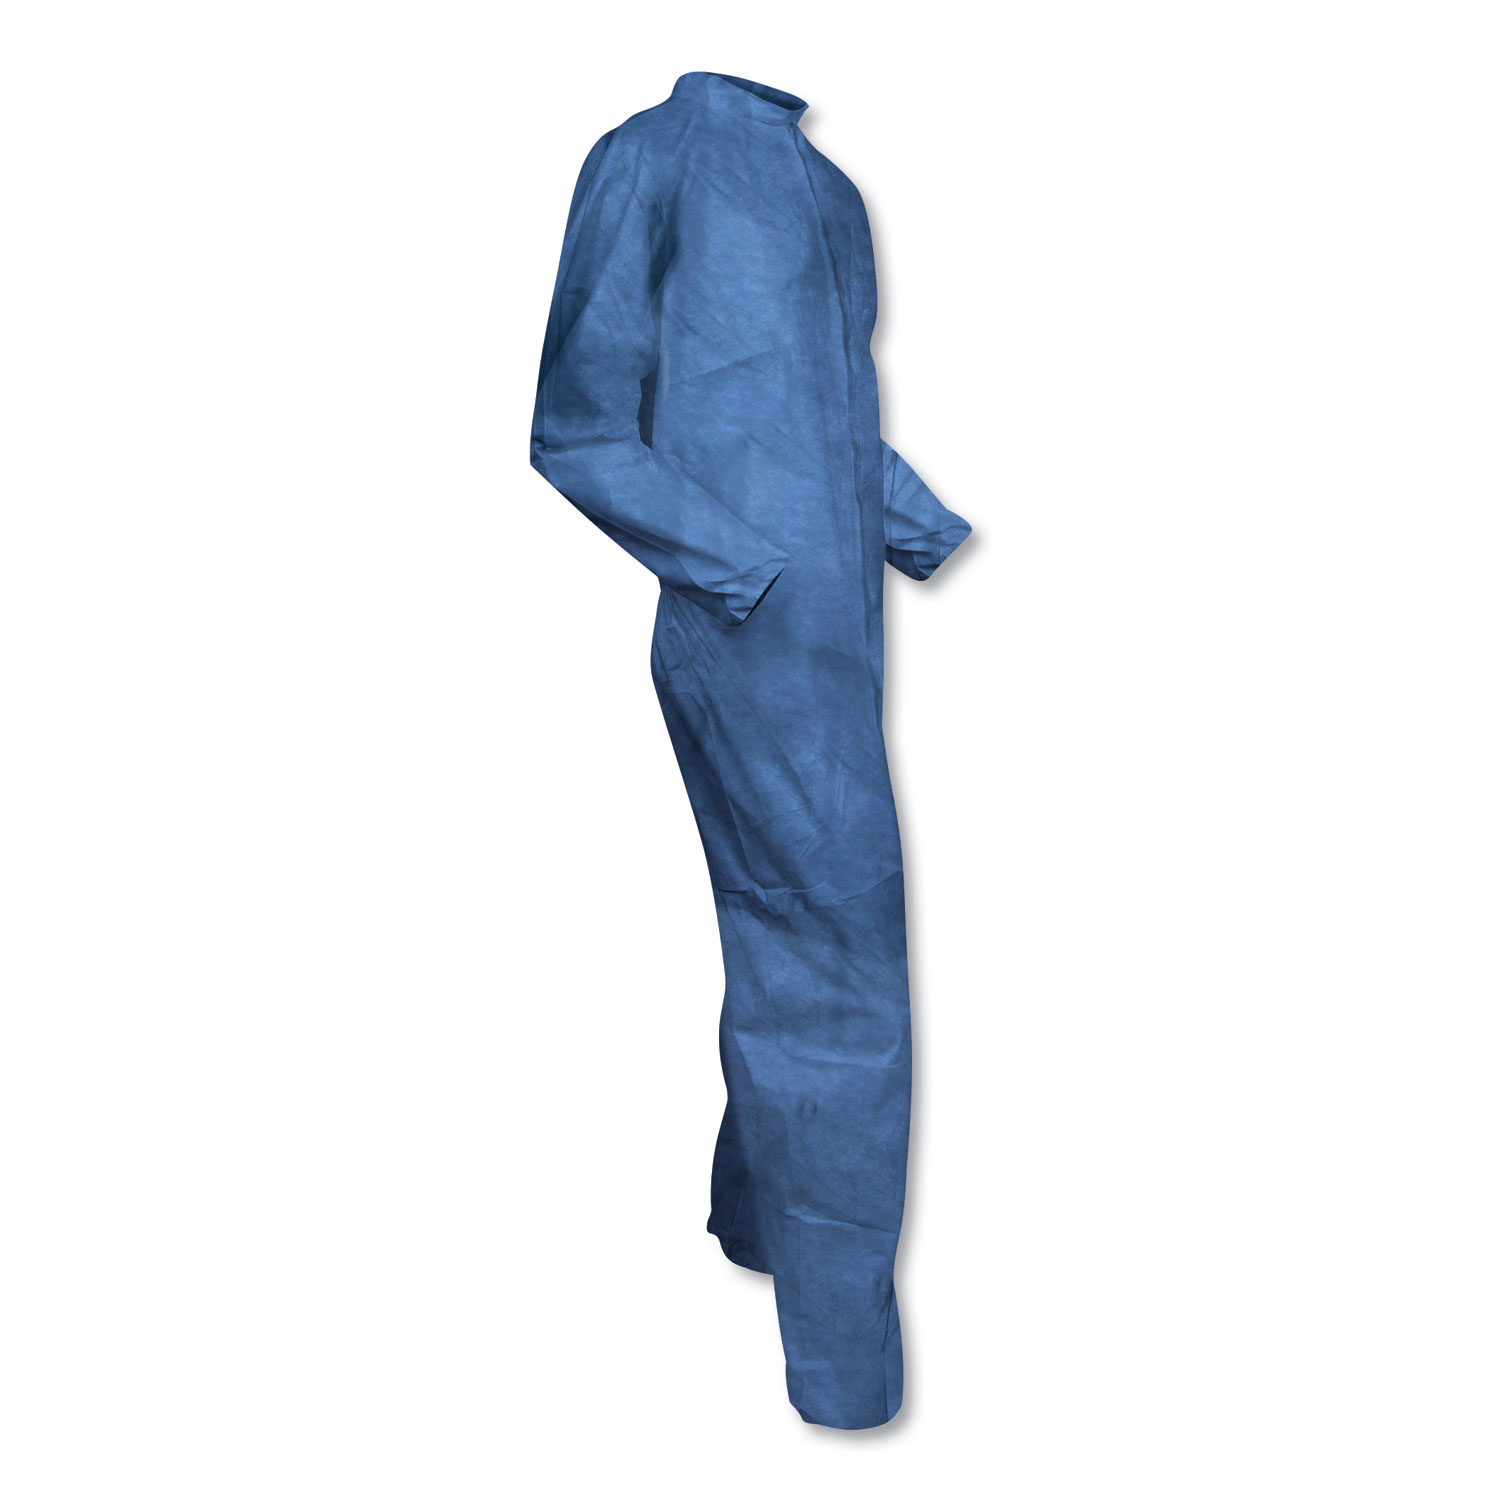 A60 Elastic-Cuff, Ankle & Back Coveralls, Blue, Large, 24/Case